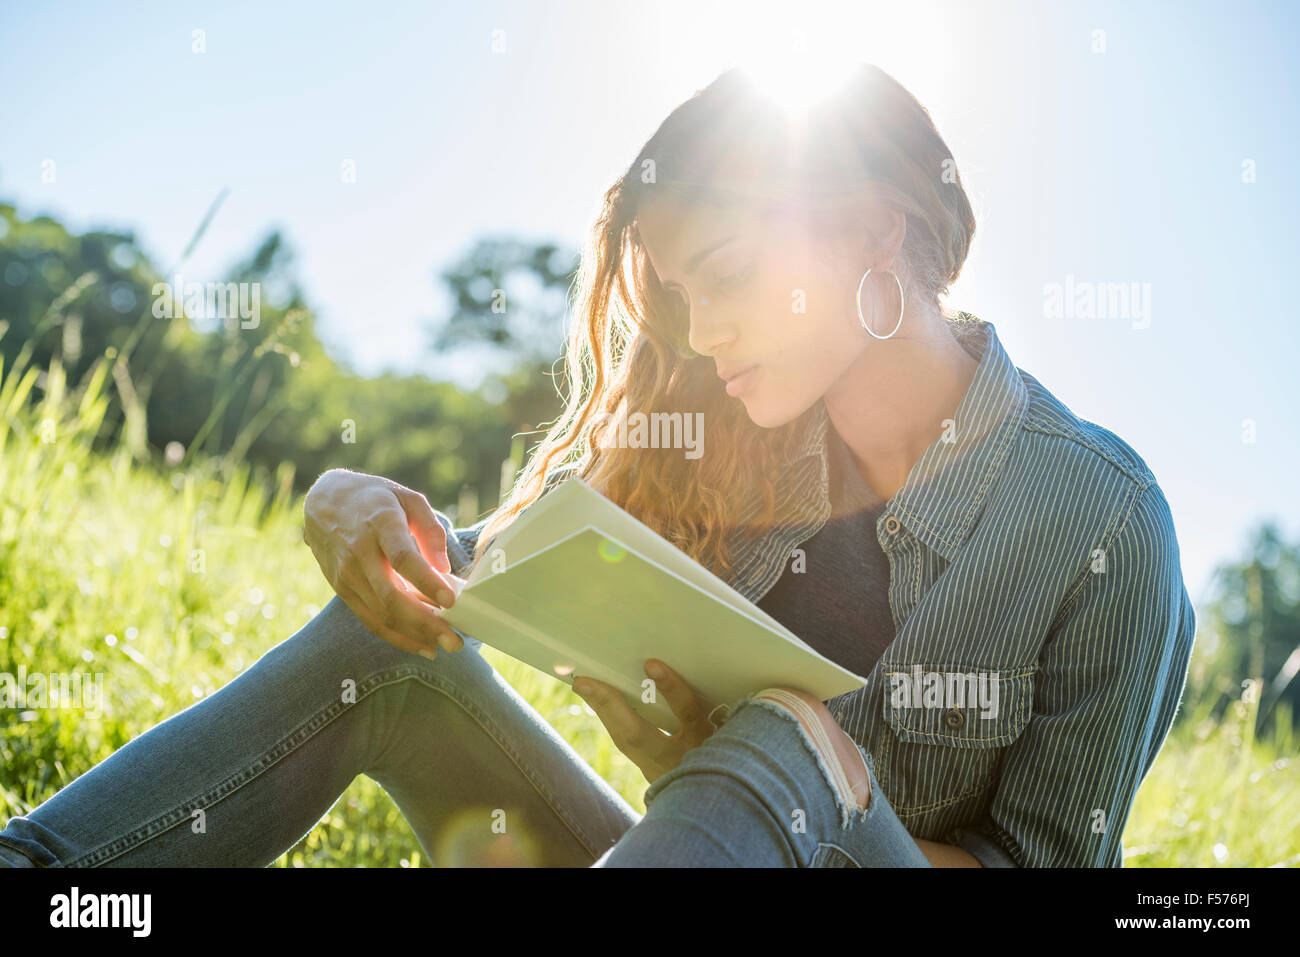 A young woman sitting in the sun reading a book Stock Photo